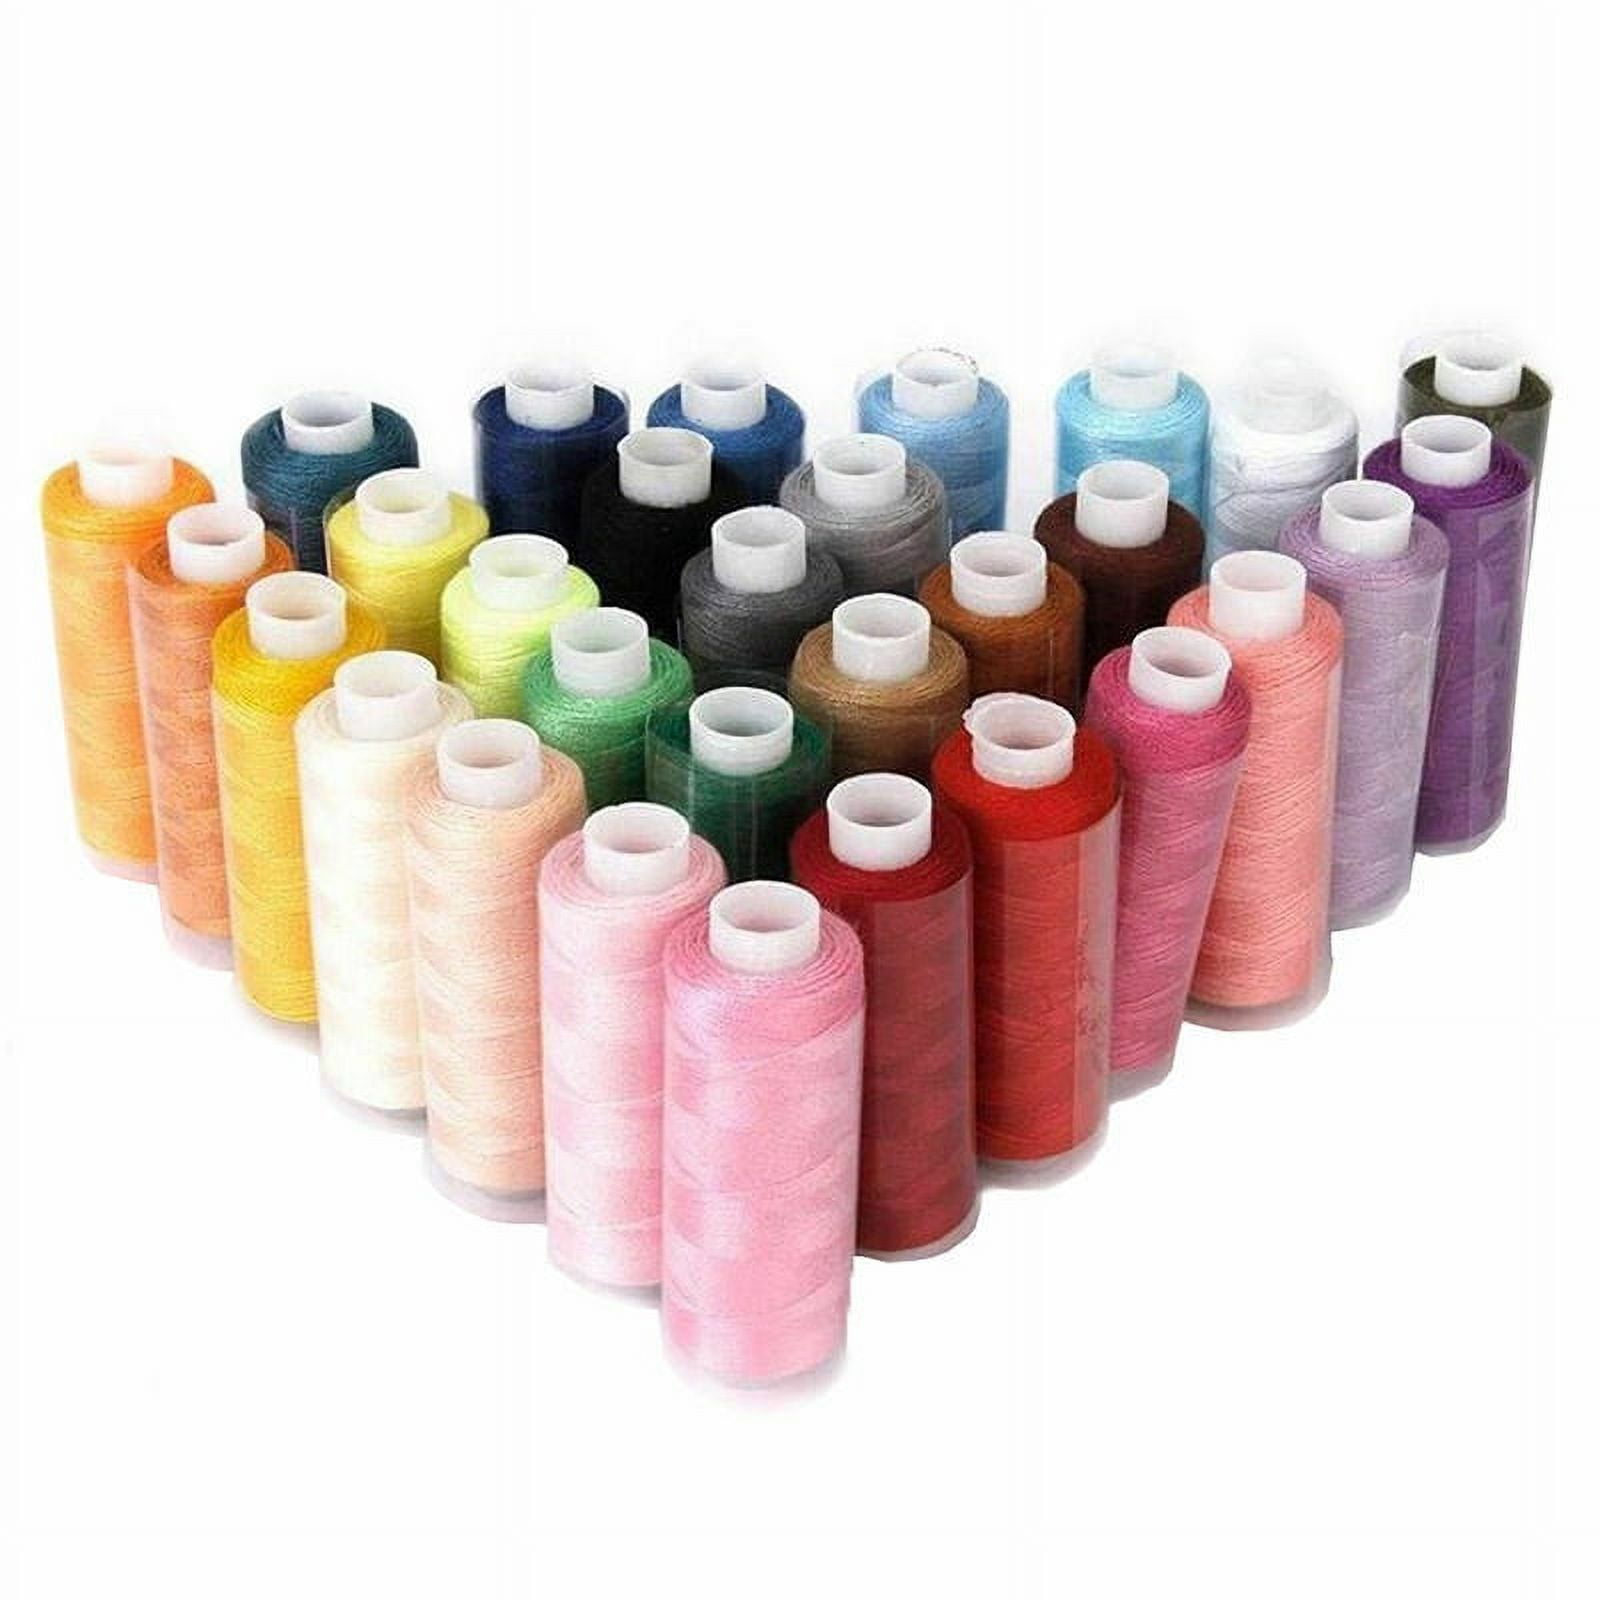 Casewin Sewing Thread Assortment Coil 30 Color 250 Yard Each Polyester  Thread Sewing Kit All Purpose Polyester Thread for Hand and Machine Sewing